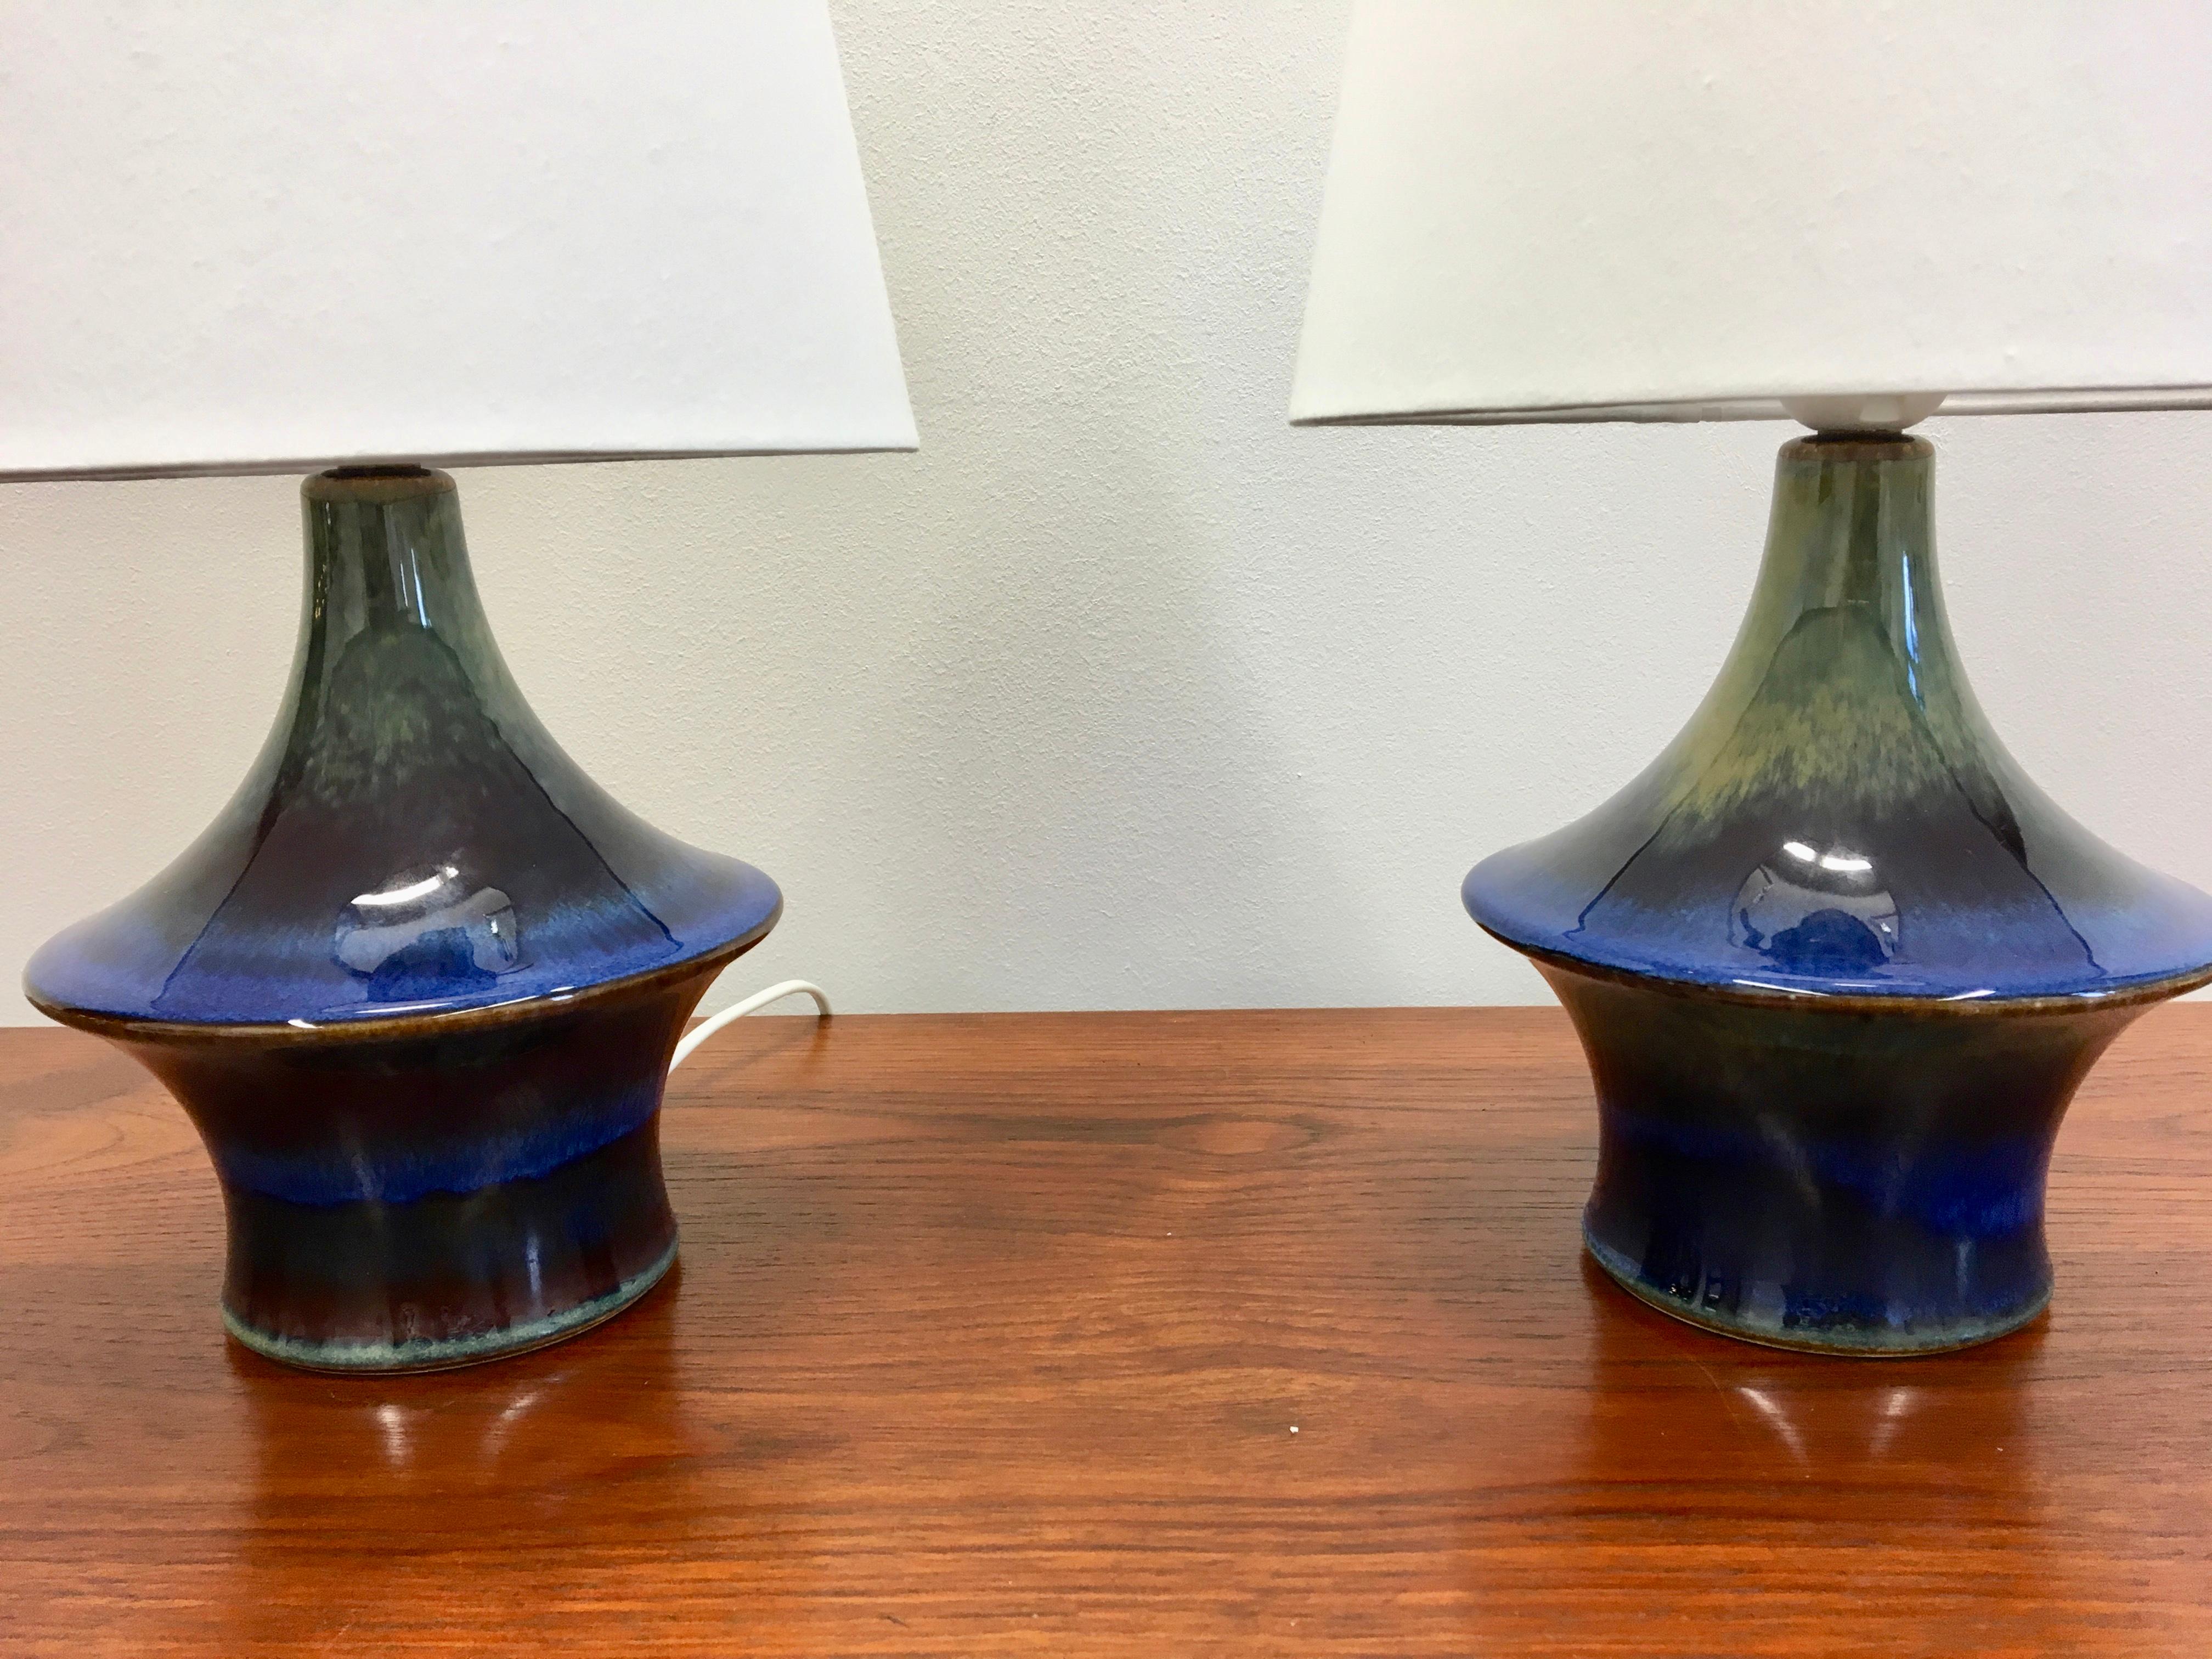 This pair of ceramic table lamps was produced by Danish company Soholm Stentoj in the 1960s.
The lamps are made of ceramic glazed stoneware. The glaze is a beautiful mixture of blue and greenish tones. The lamps have been rewired for European usage